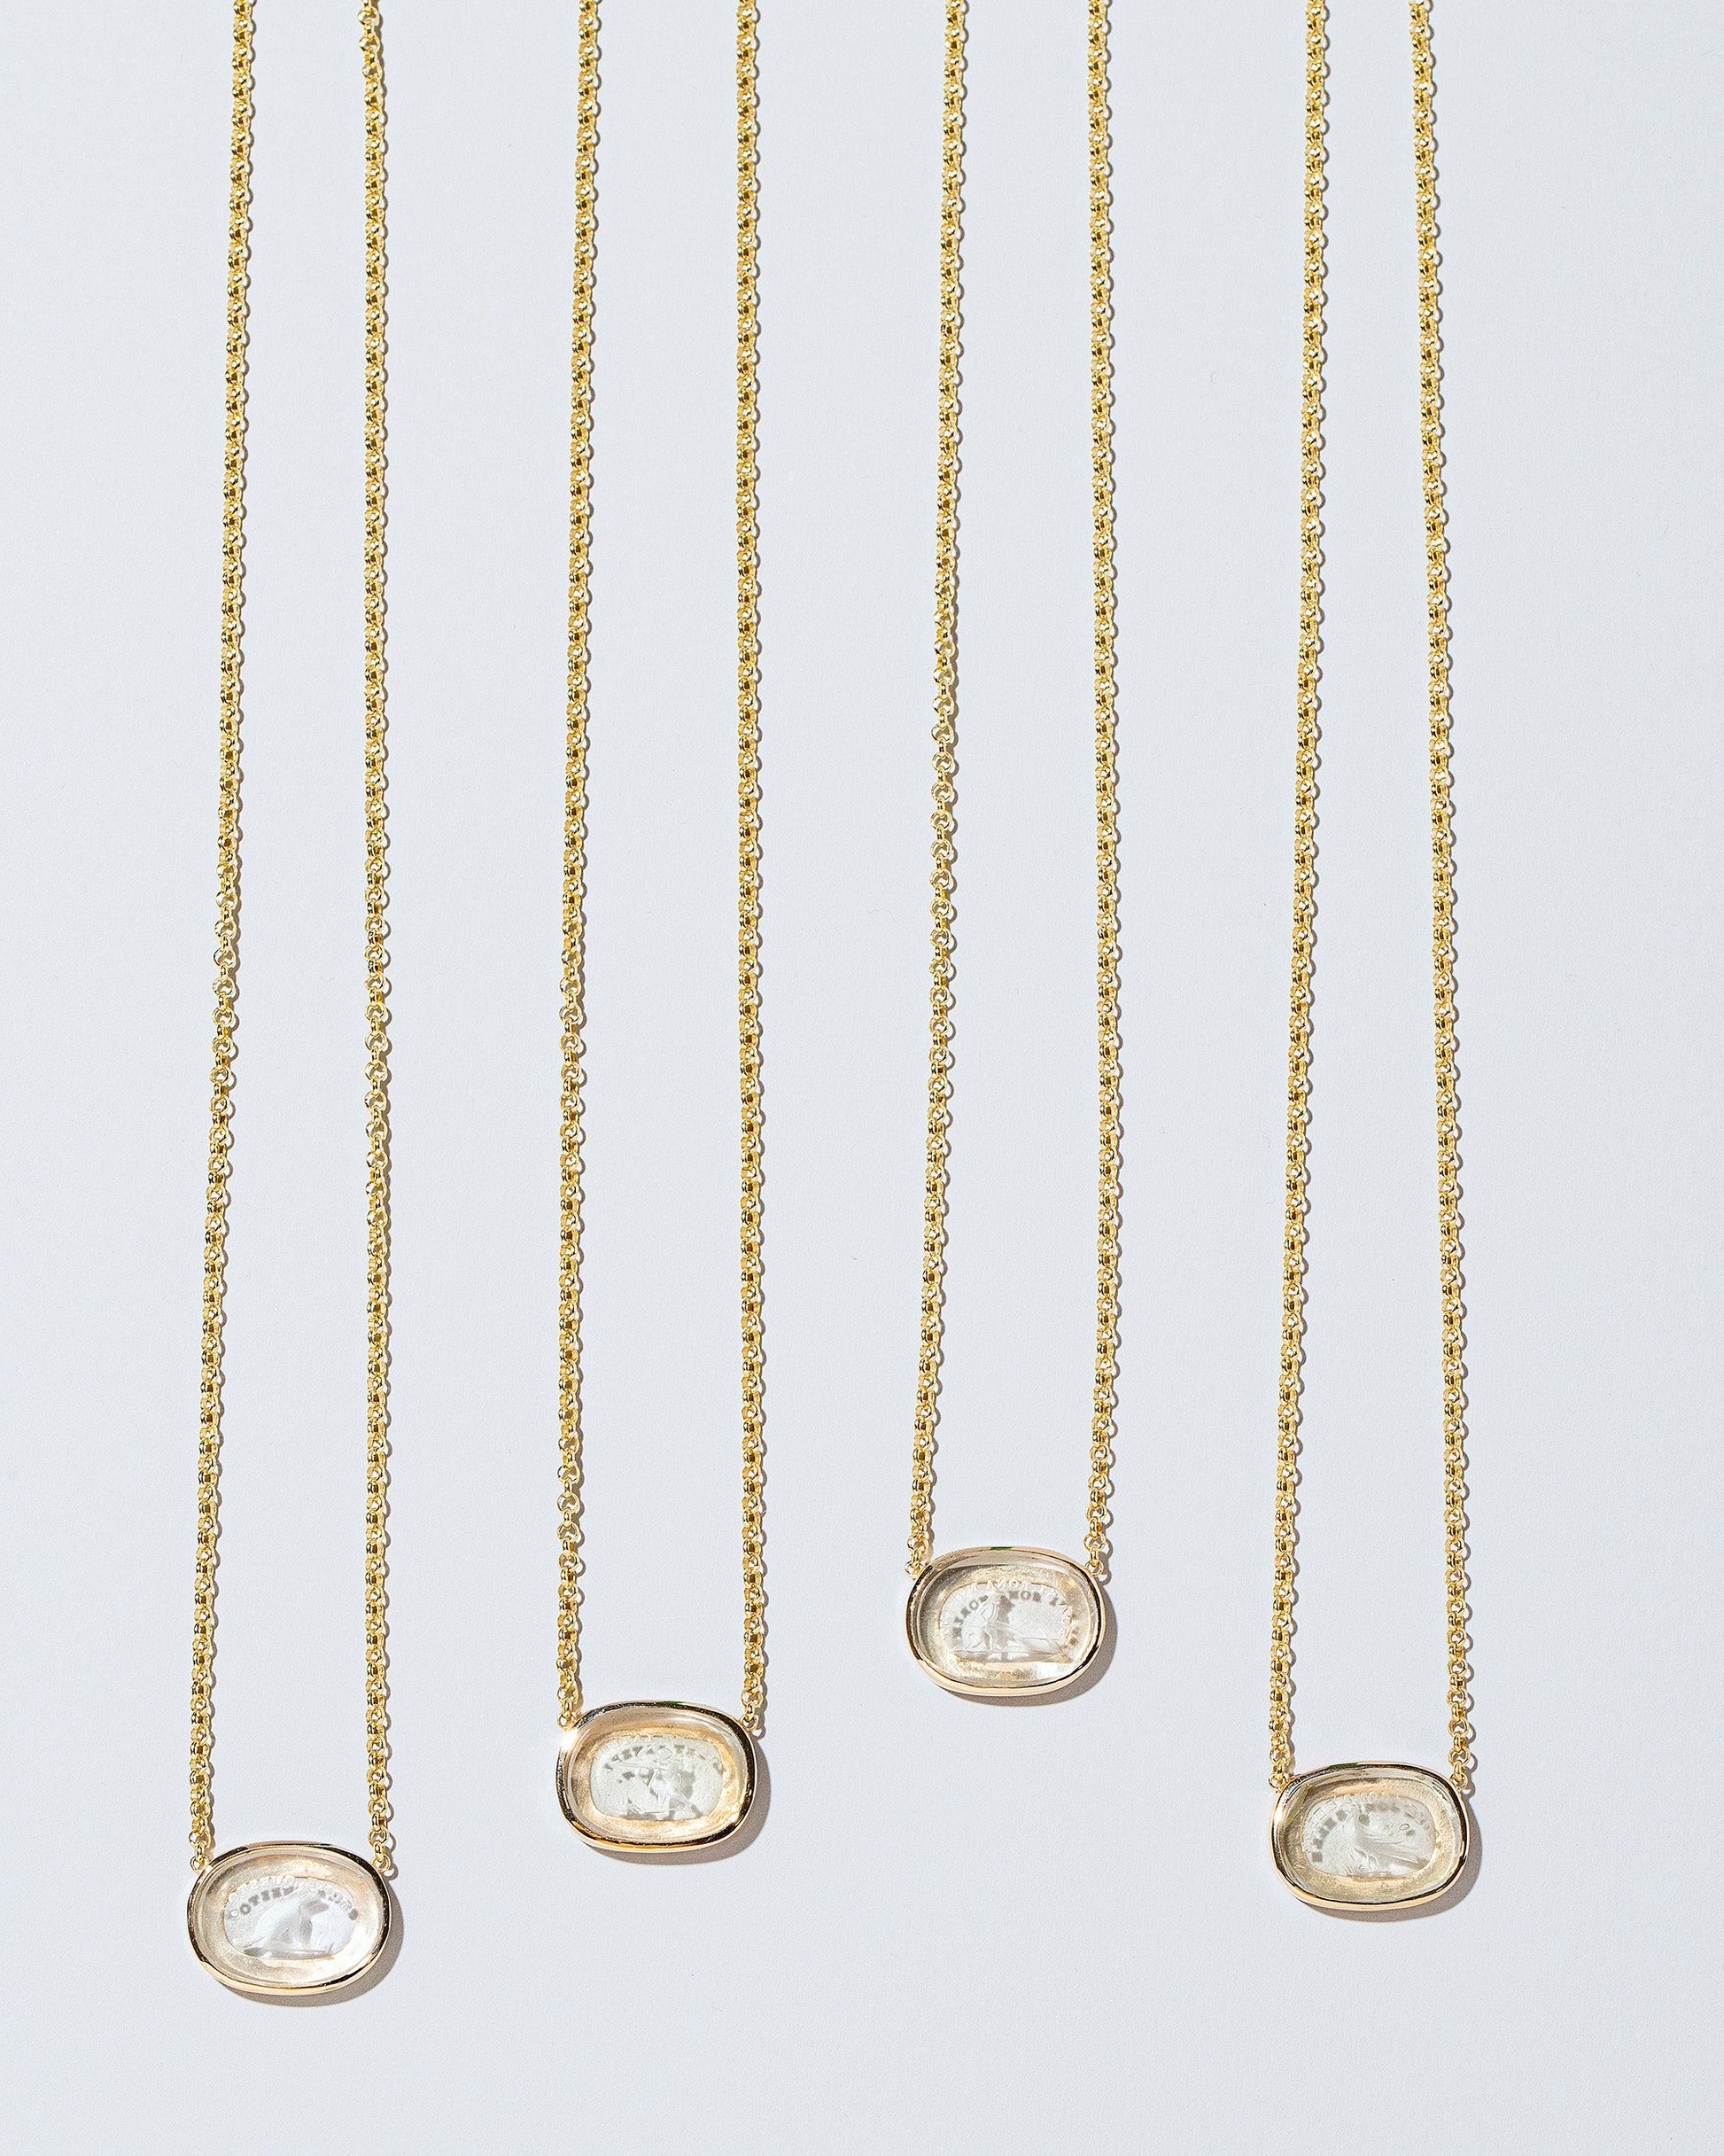 Group of Intaglio Necklaces on light colored background.